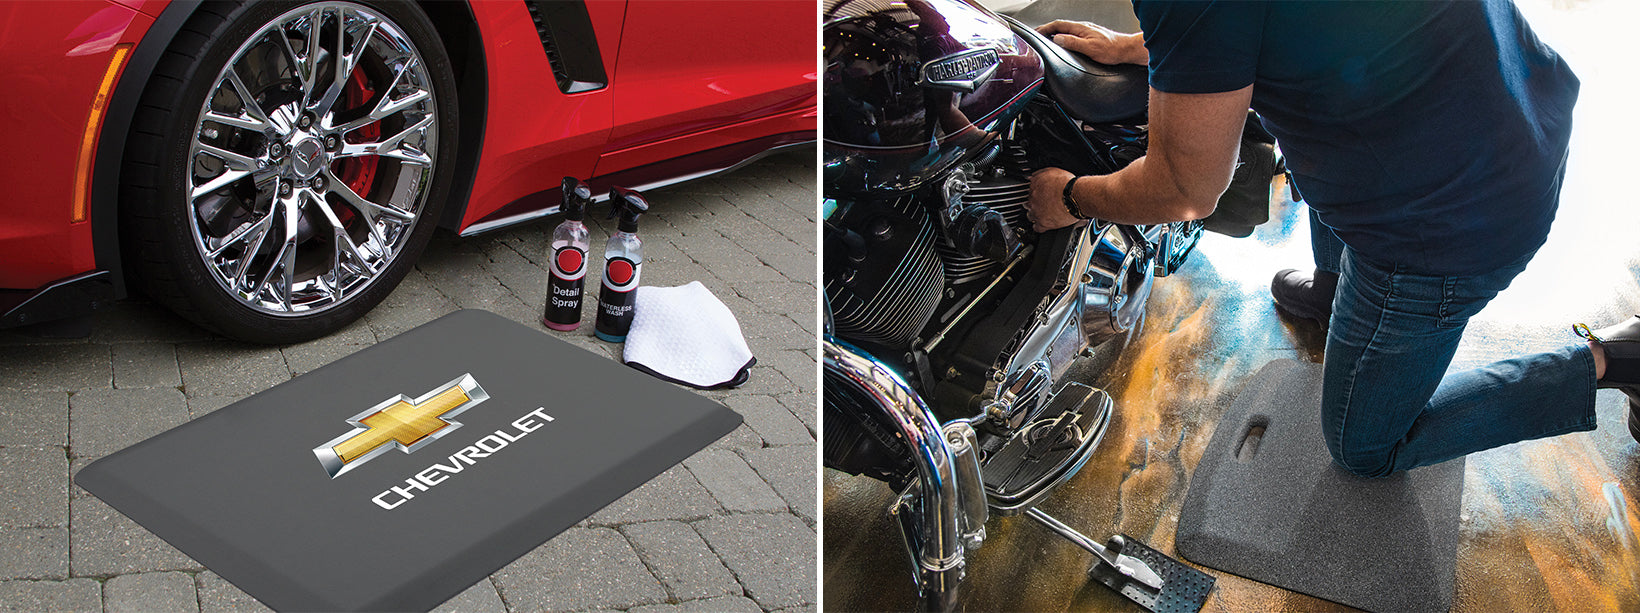 Licensed WellnessMats and Granite mats to trick out your garage